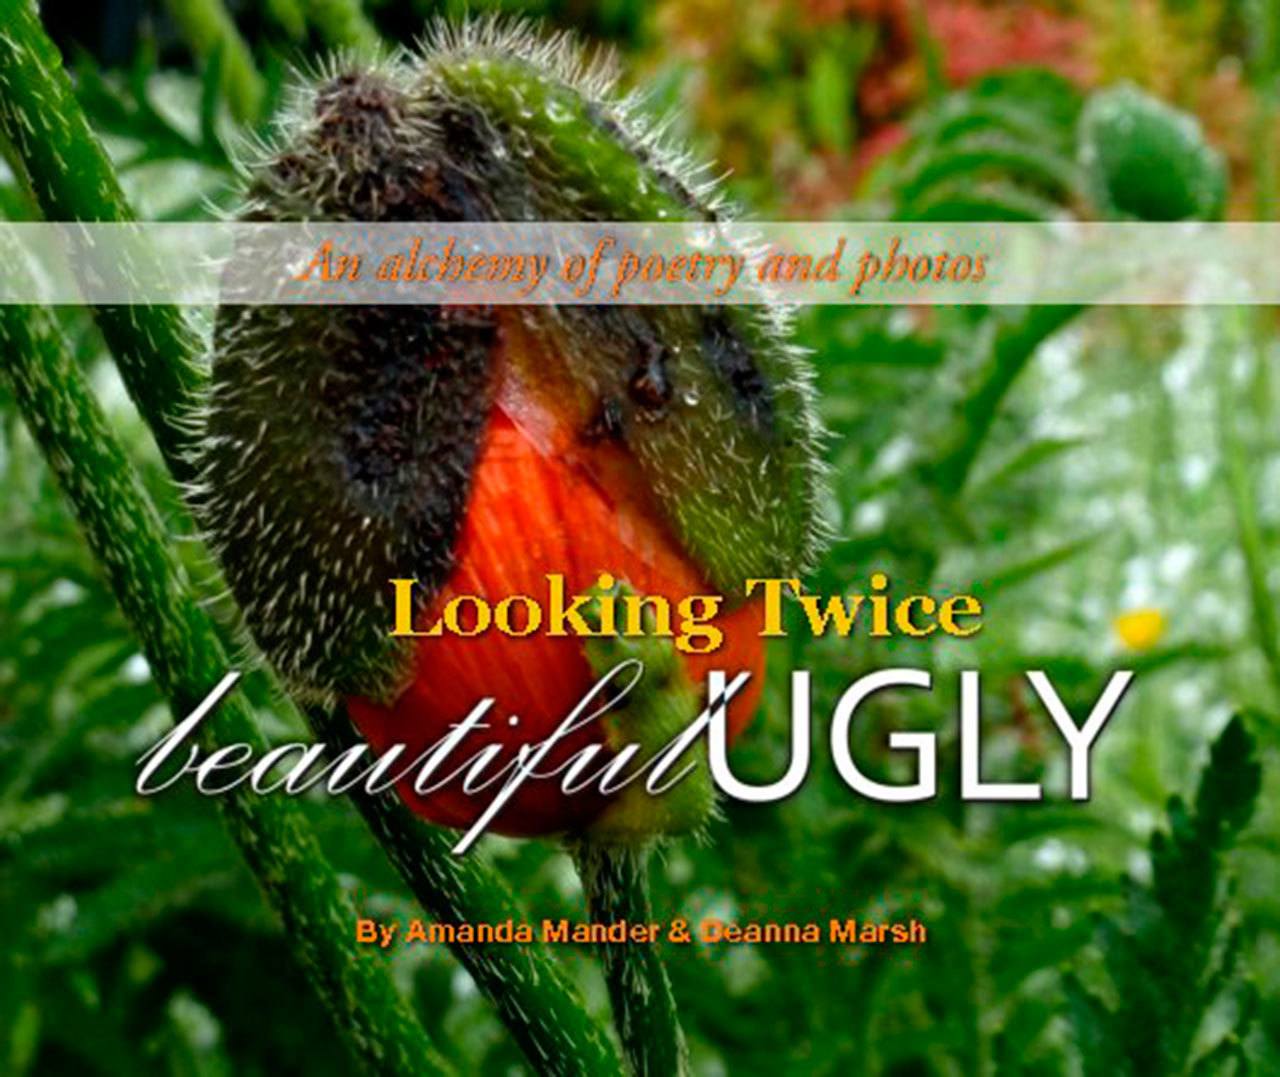 Image courtesy of Eagle Harbor Book Company                                Amanda Mander and Deanna Marsh will stop by Eagle Harbor Book Company at 1 p.m. Sunday, Nov. 6, to discuss their book “Looking Twice: Beautiful Ugly.”